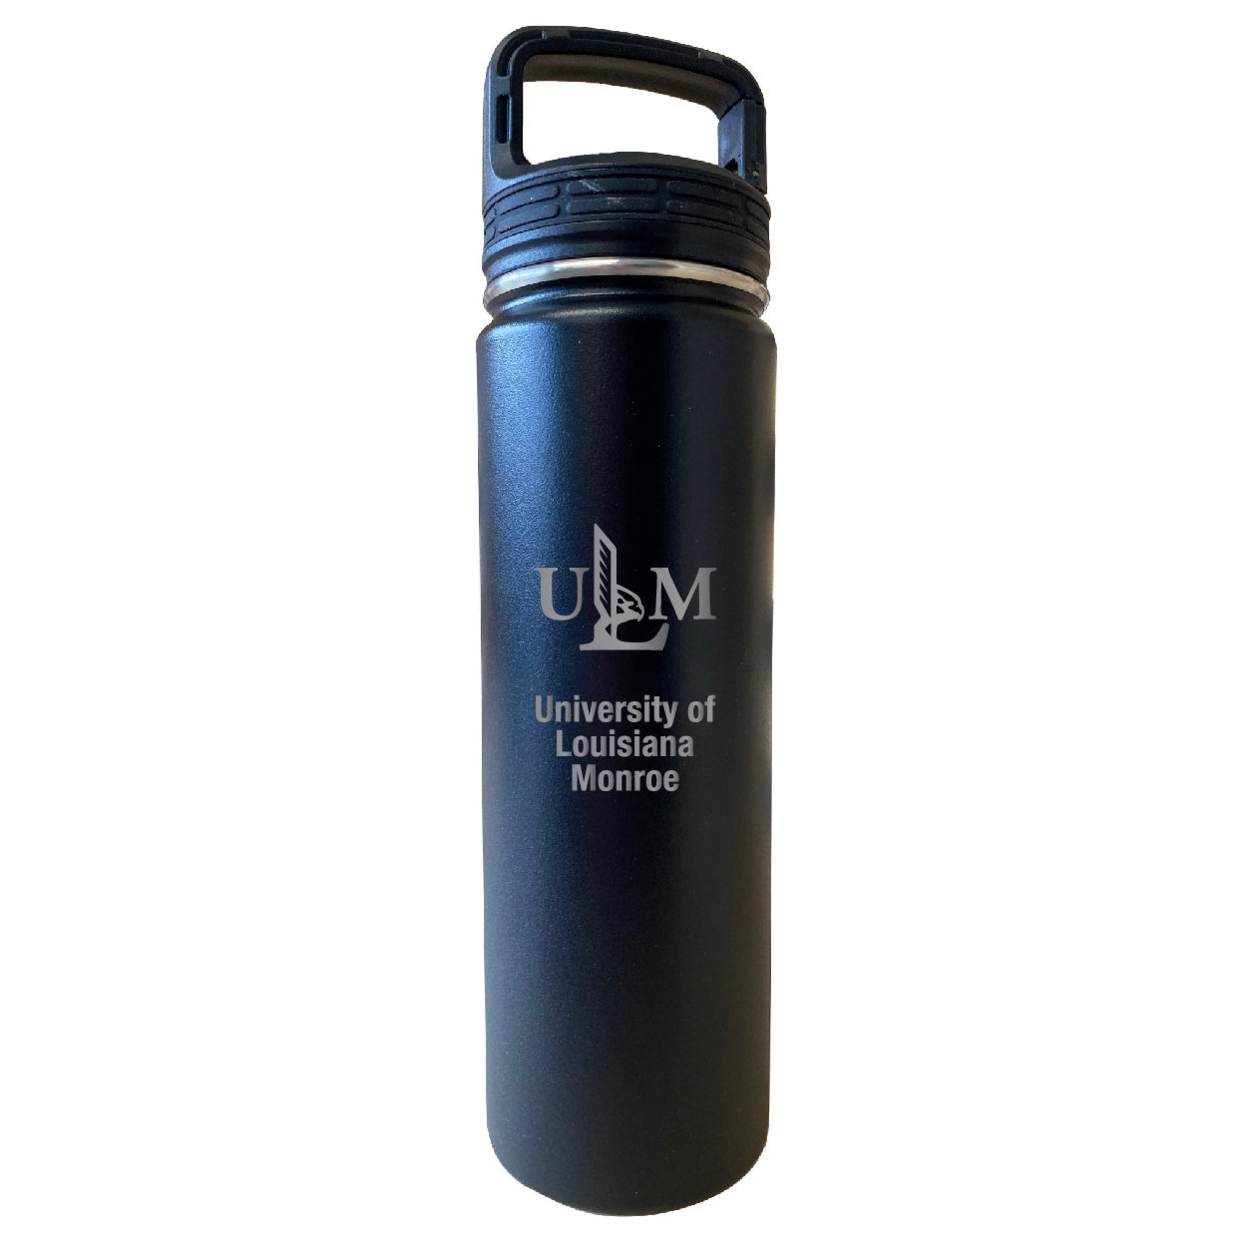 University Of Louisiana Monroe 32 Oz Engraved Insulated Double Wall Stainless Steel Water Bottle Tumbler (Black)